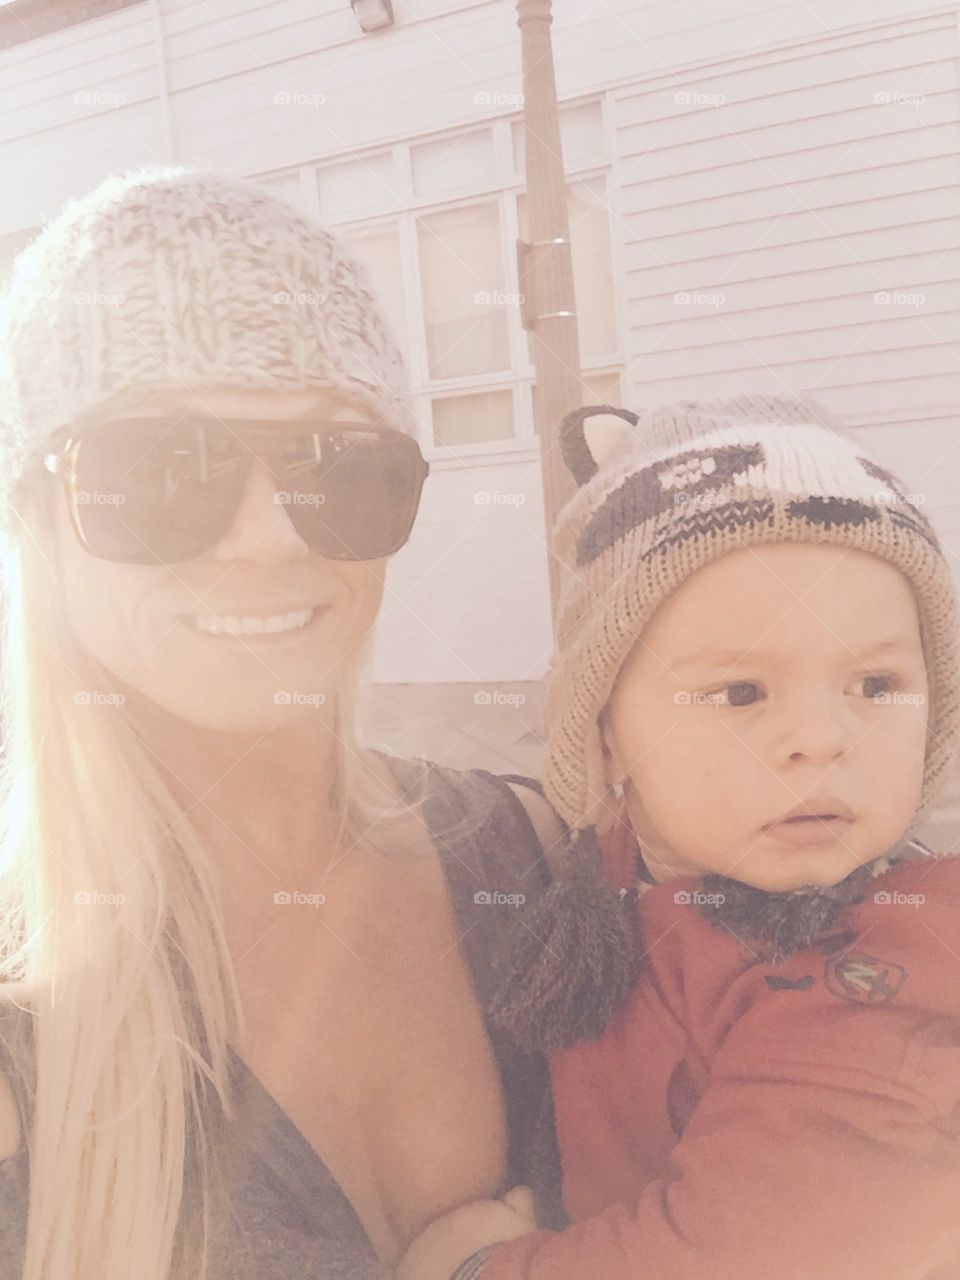 Carter and mama!! 

#Winter, #beanies, #17months # raccoon #walking the beach #newport beach #ca #he looks like his mama #Carters baby clothes 